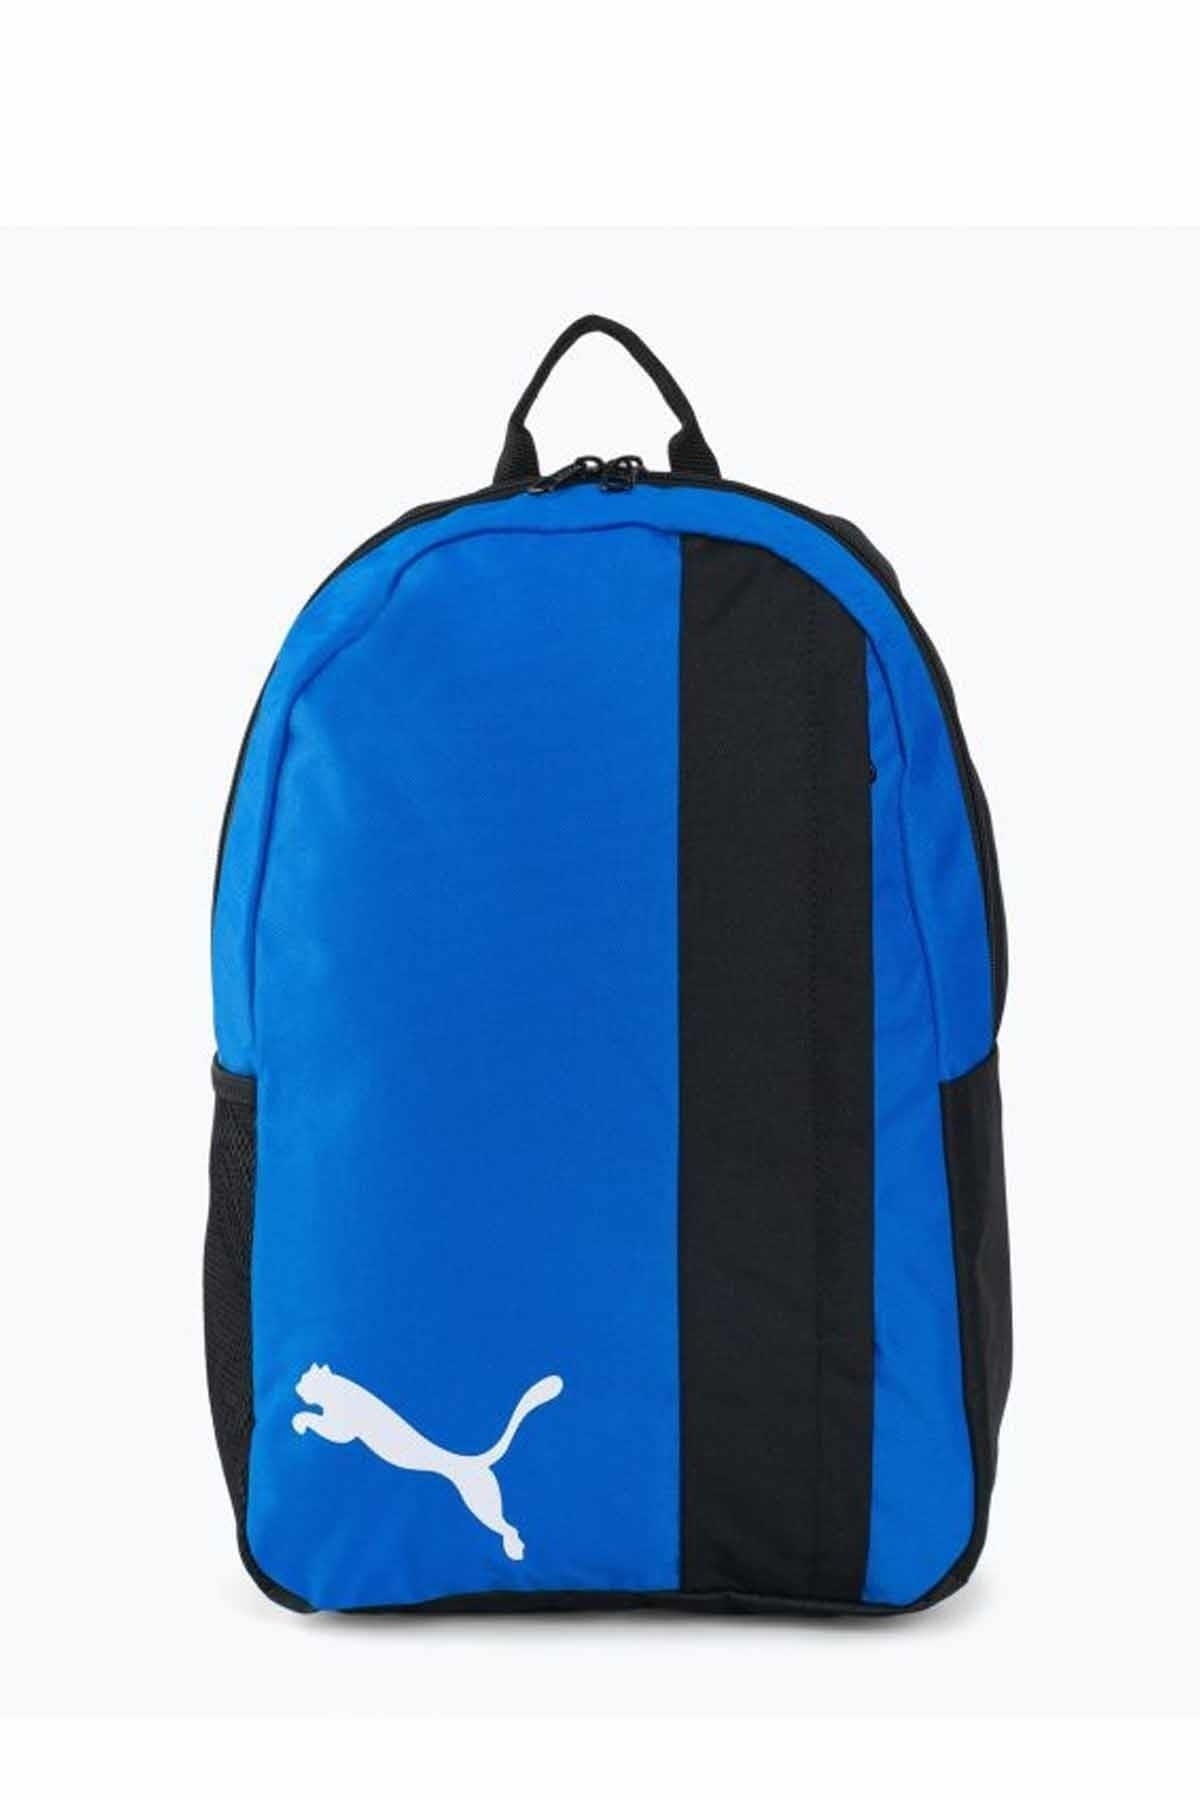 Backpack And School Bag 23 30 X 44 X 22 Cm Unisex Backpack 076854-02-1 Blue